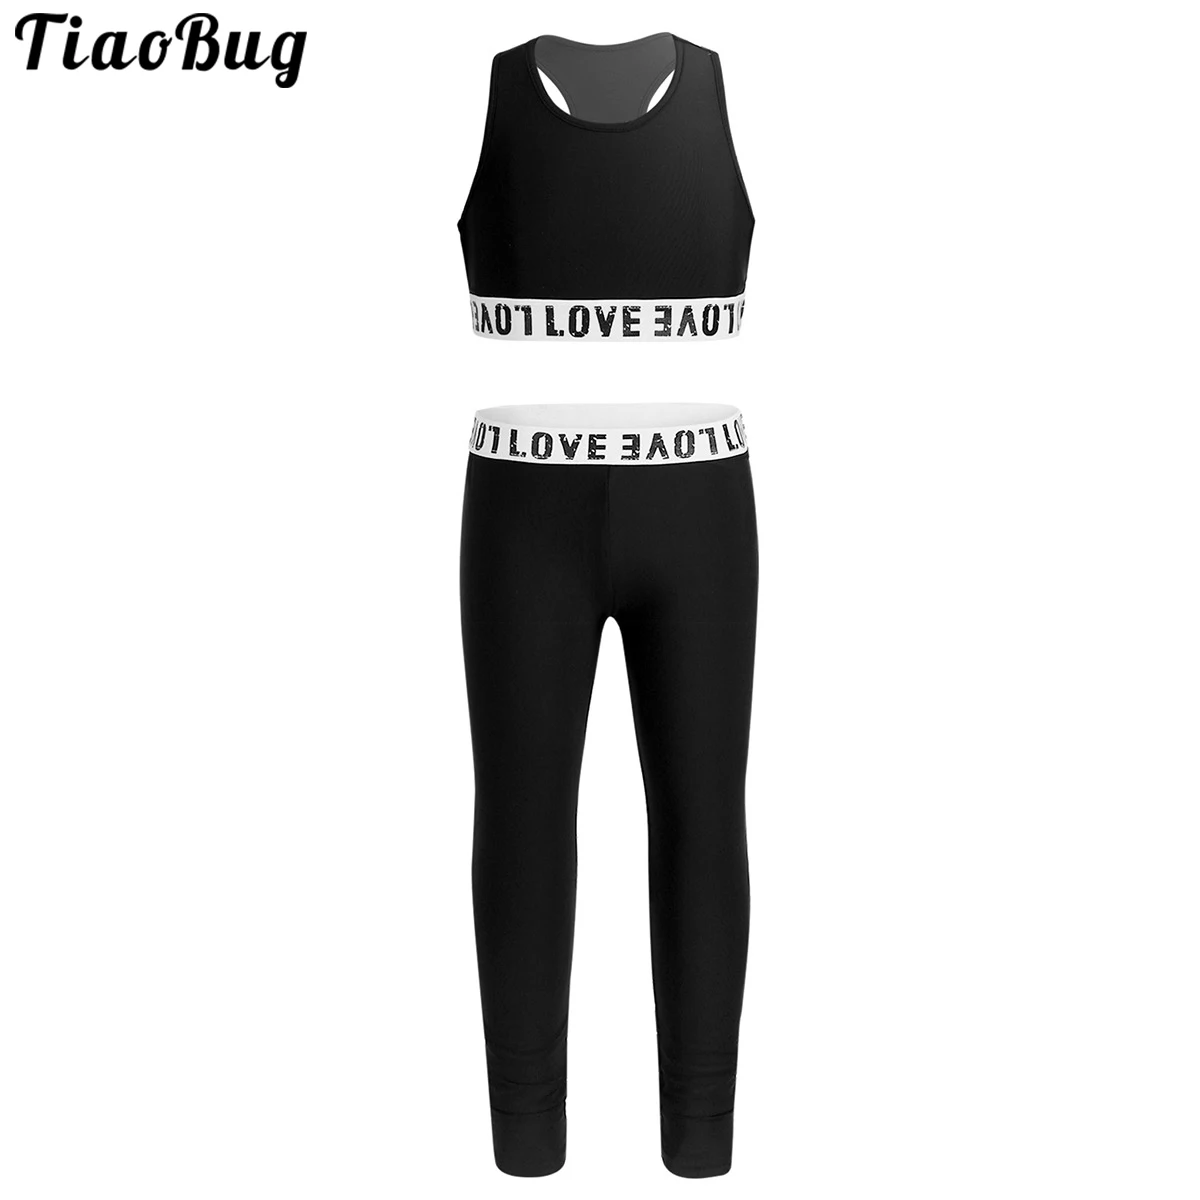 

TiaoBug 2Pcs Kids Girls Athletic Outfit Letter Printed Sleeveless Racer Back Tanks Crop Top With Leggings Set For Gym Workout